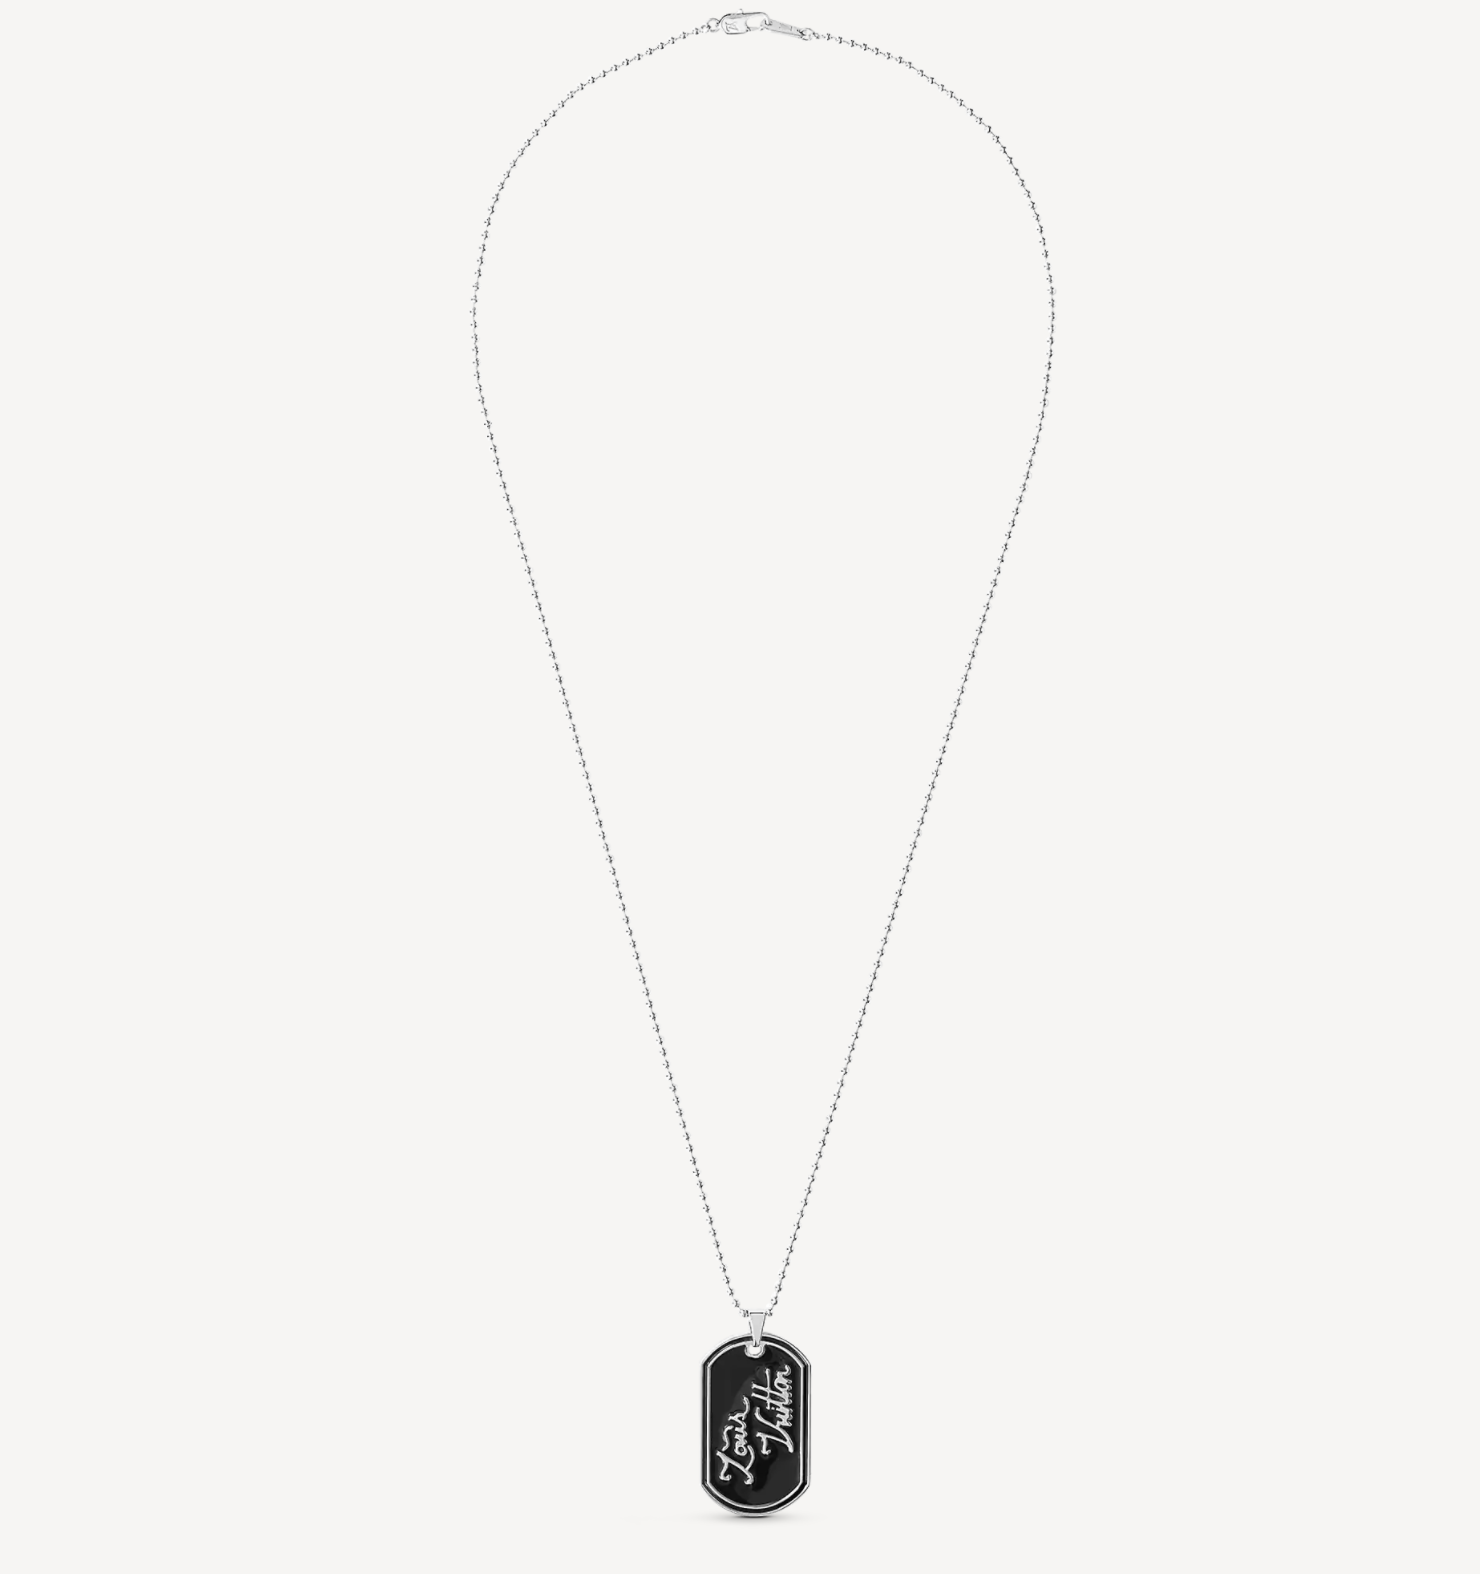 Necklaces to Elevate Your Style | V Man